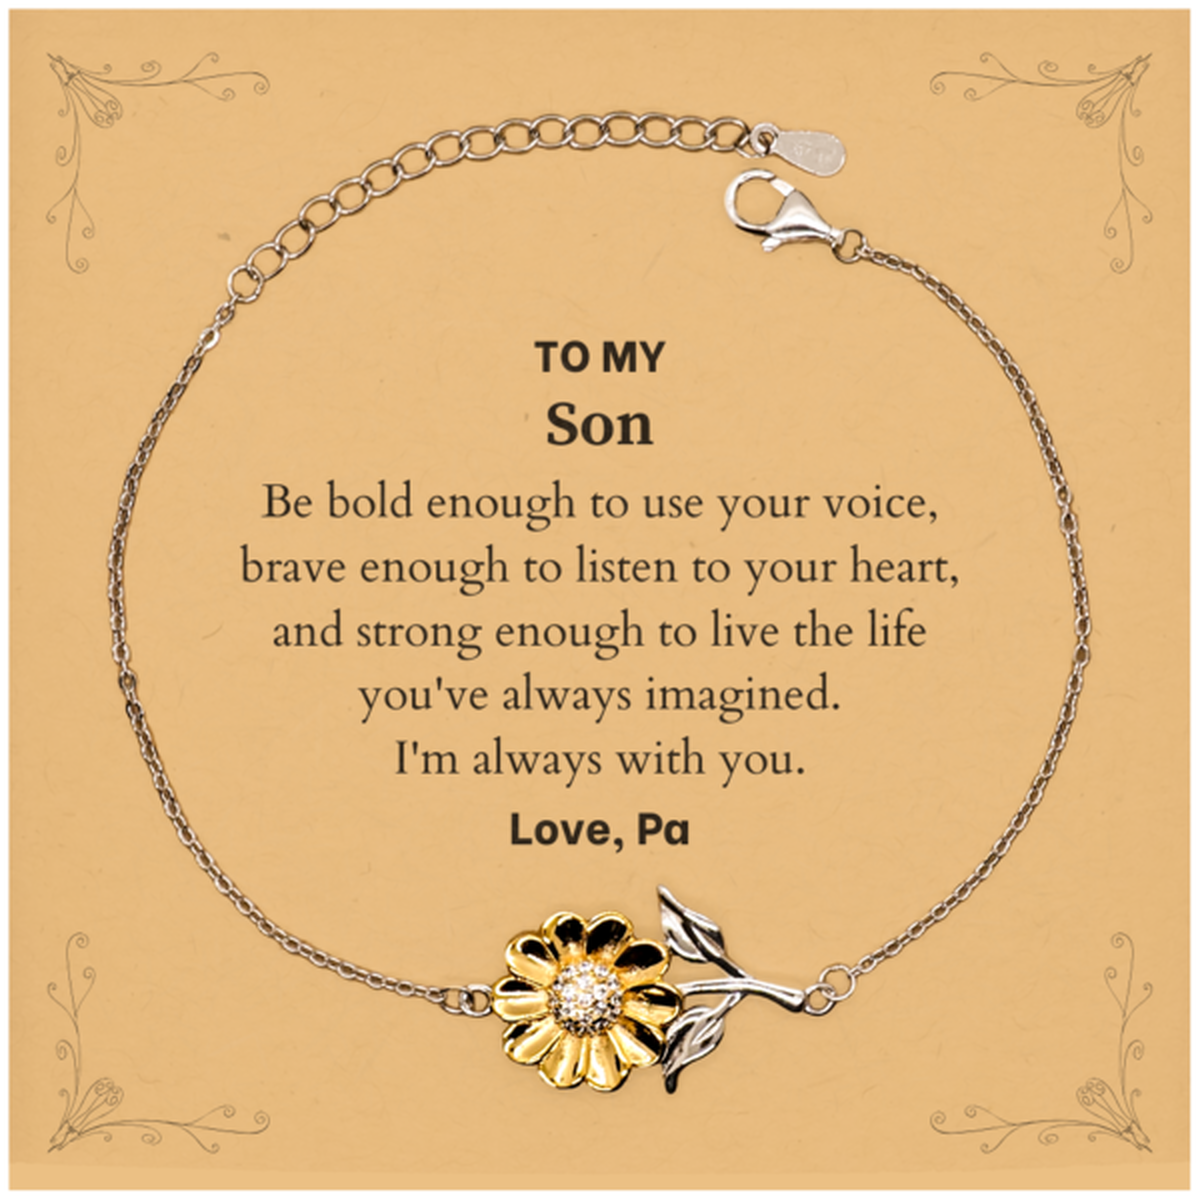 Keepsake Son Sunflower Bracelet Gift Idea Graduation Christmas Birthday Son from Pa, Son Be bold enough to use your voice, brave enough to listen to your heart. Love, Pa